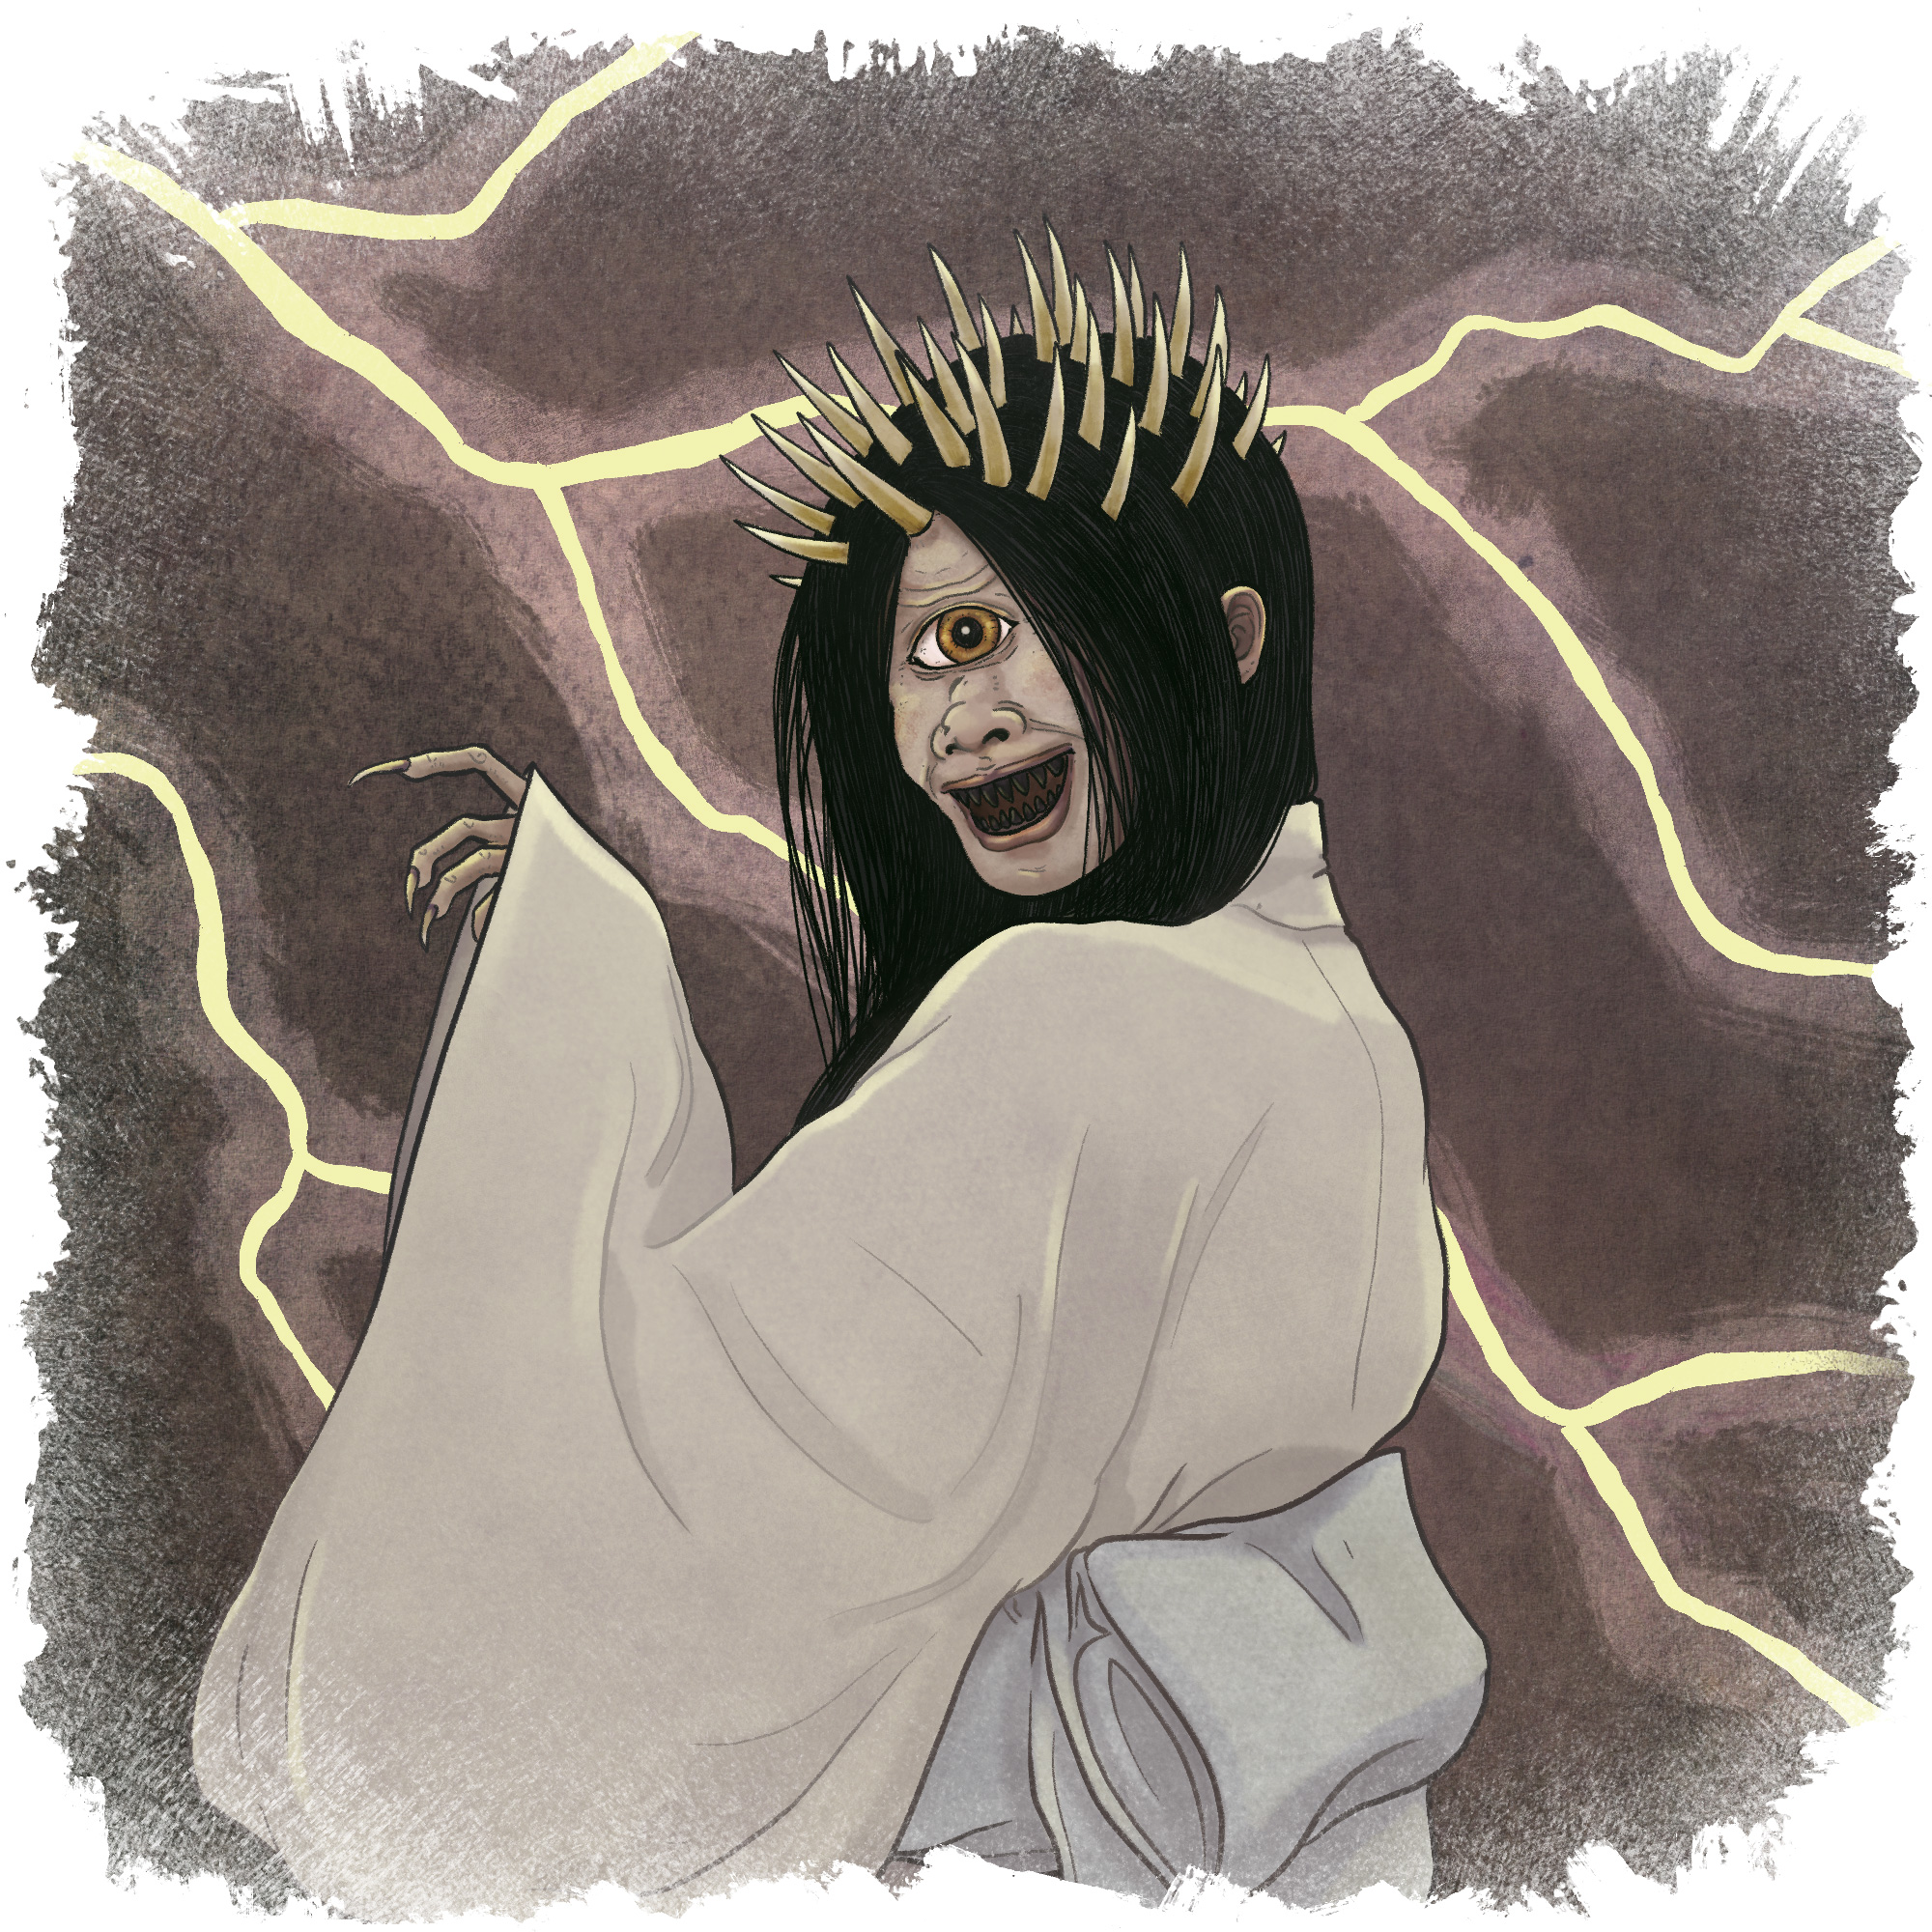 A monstrous woman with only one eye, wearing a white kimono, with many horns sprouting from the top of her head. Lightning flashes behind her.